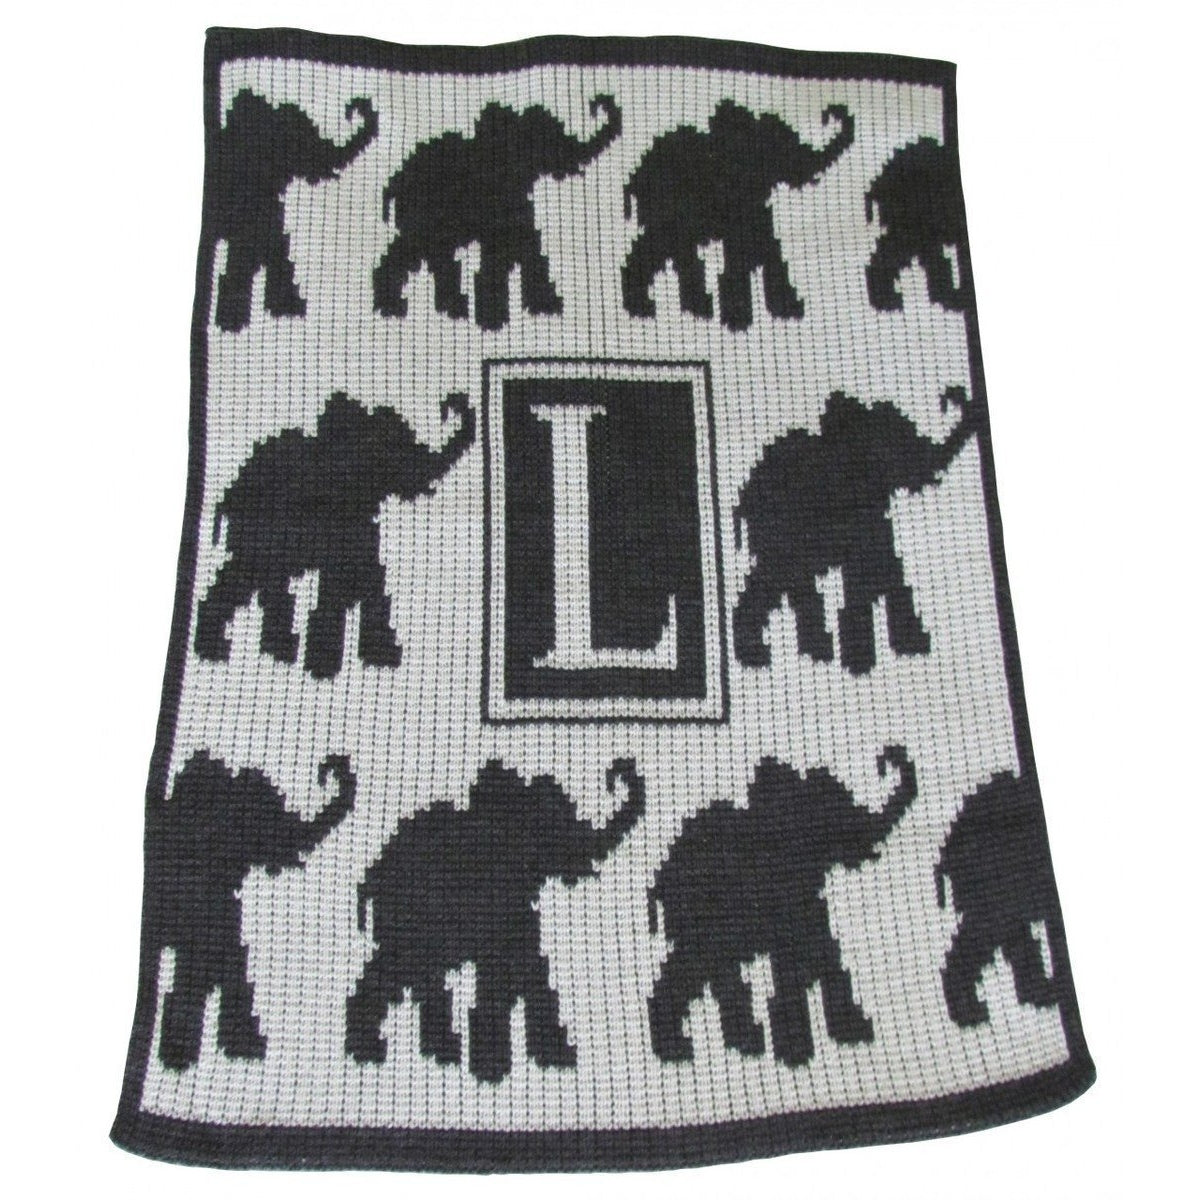 Walking Elephants Personalized Blanket - Stroller, Crib, Throw and XL sizes-Baby Blanket-Jack and Jill Boutique